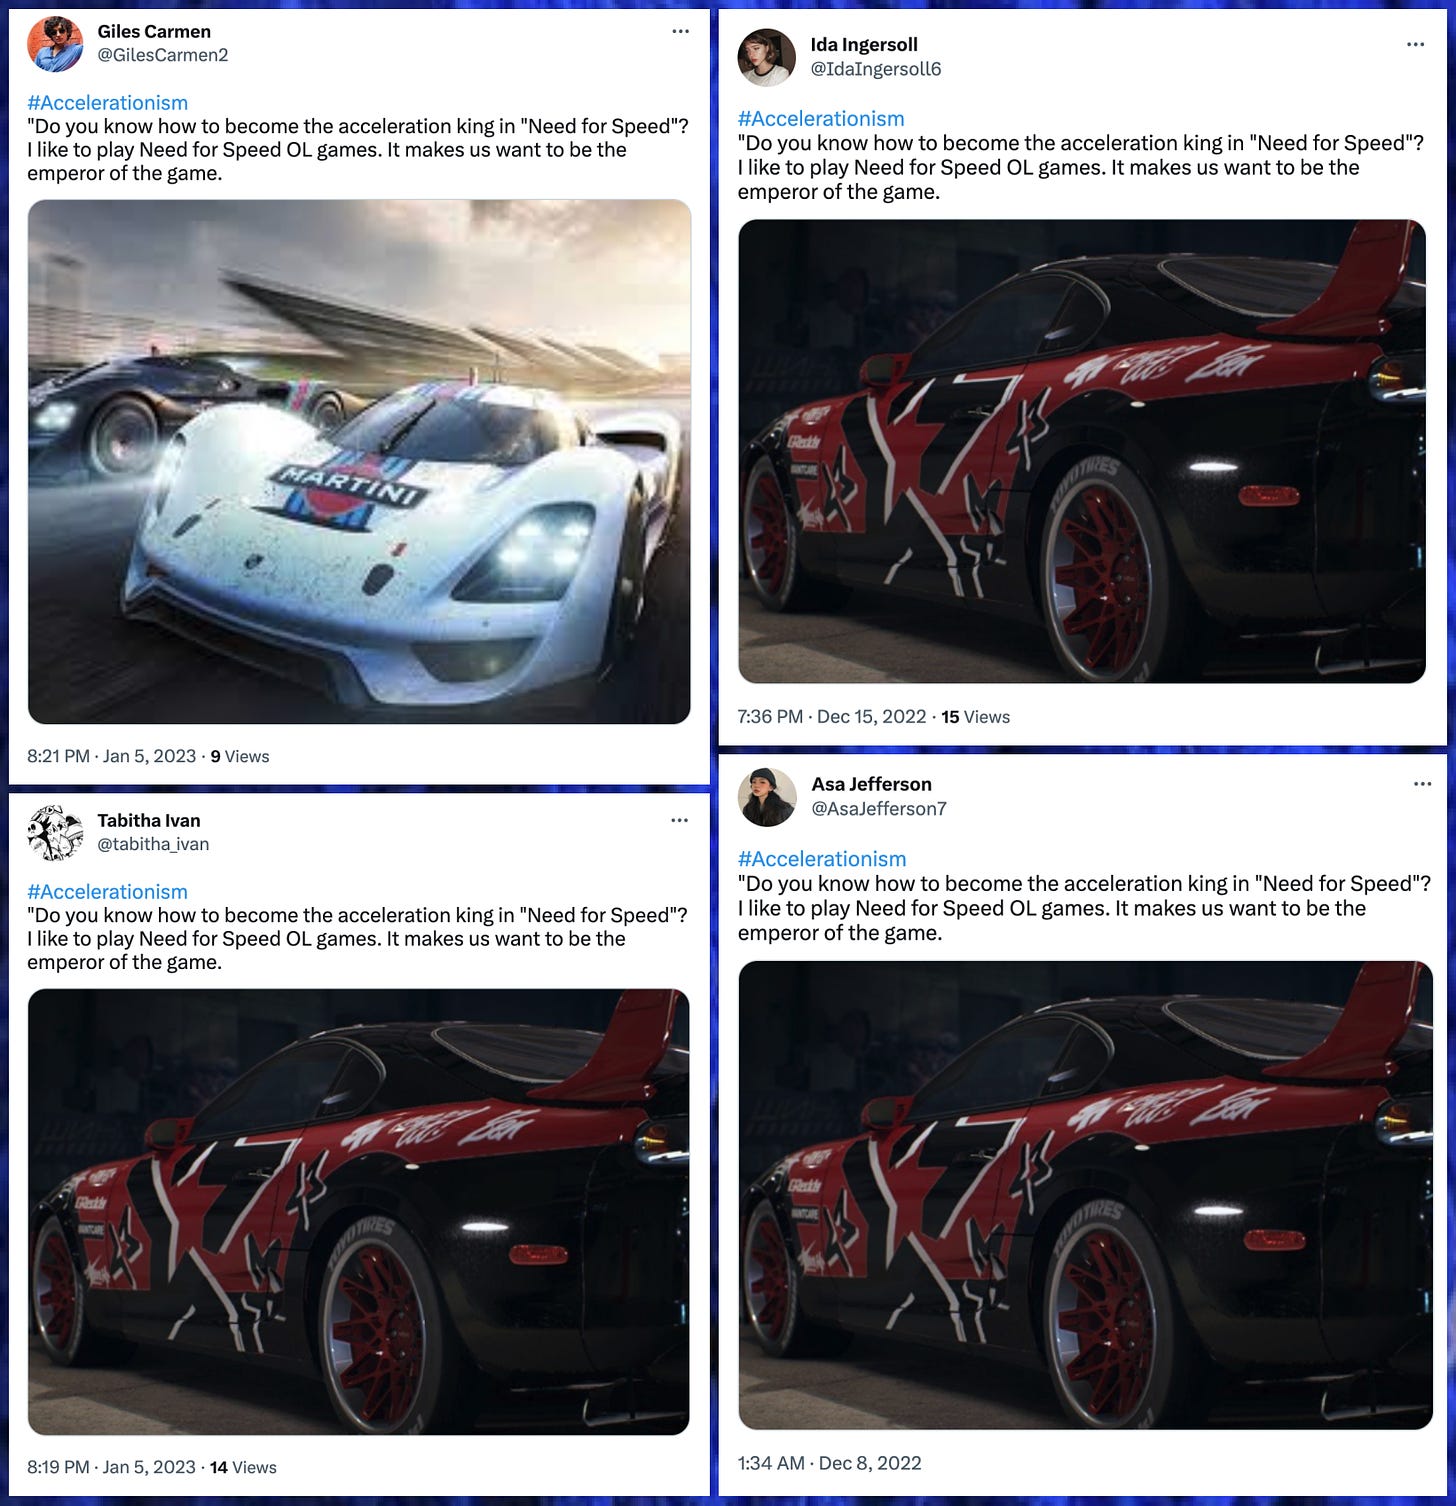 collage of #Accelerationism tweets containing "Need for Speed" screenshots